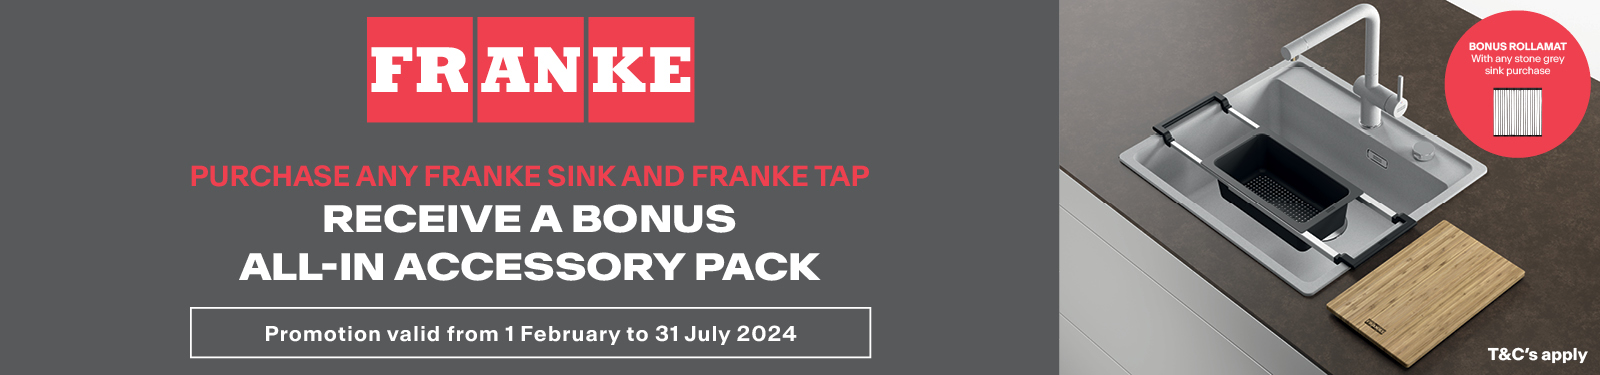 Bonus Franke Accessory Pack With Any Sink And Tap Purchase at Retravision